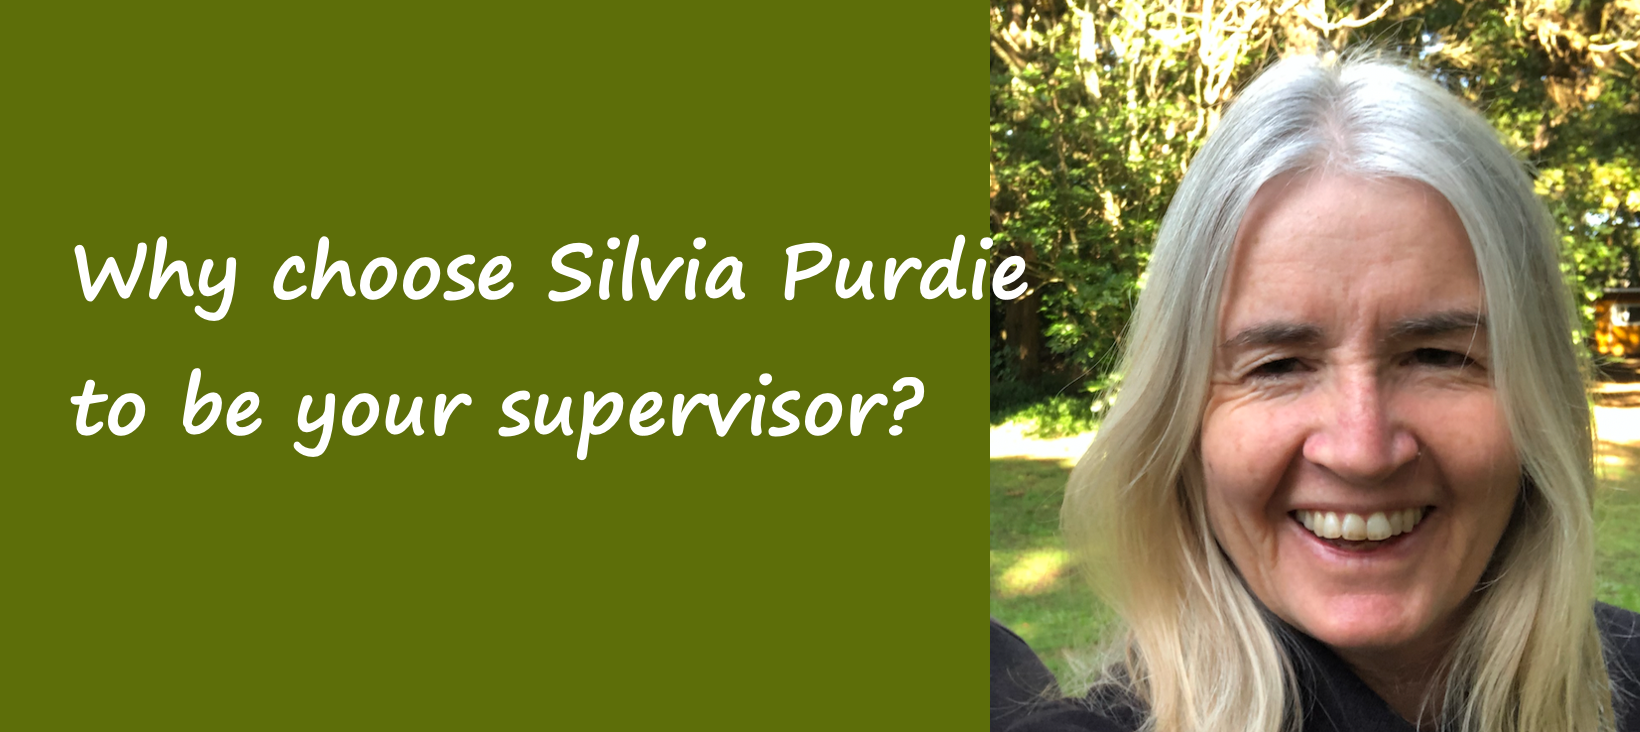 Why choose Silvia Purdie to be your supervisor?